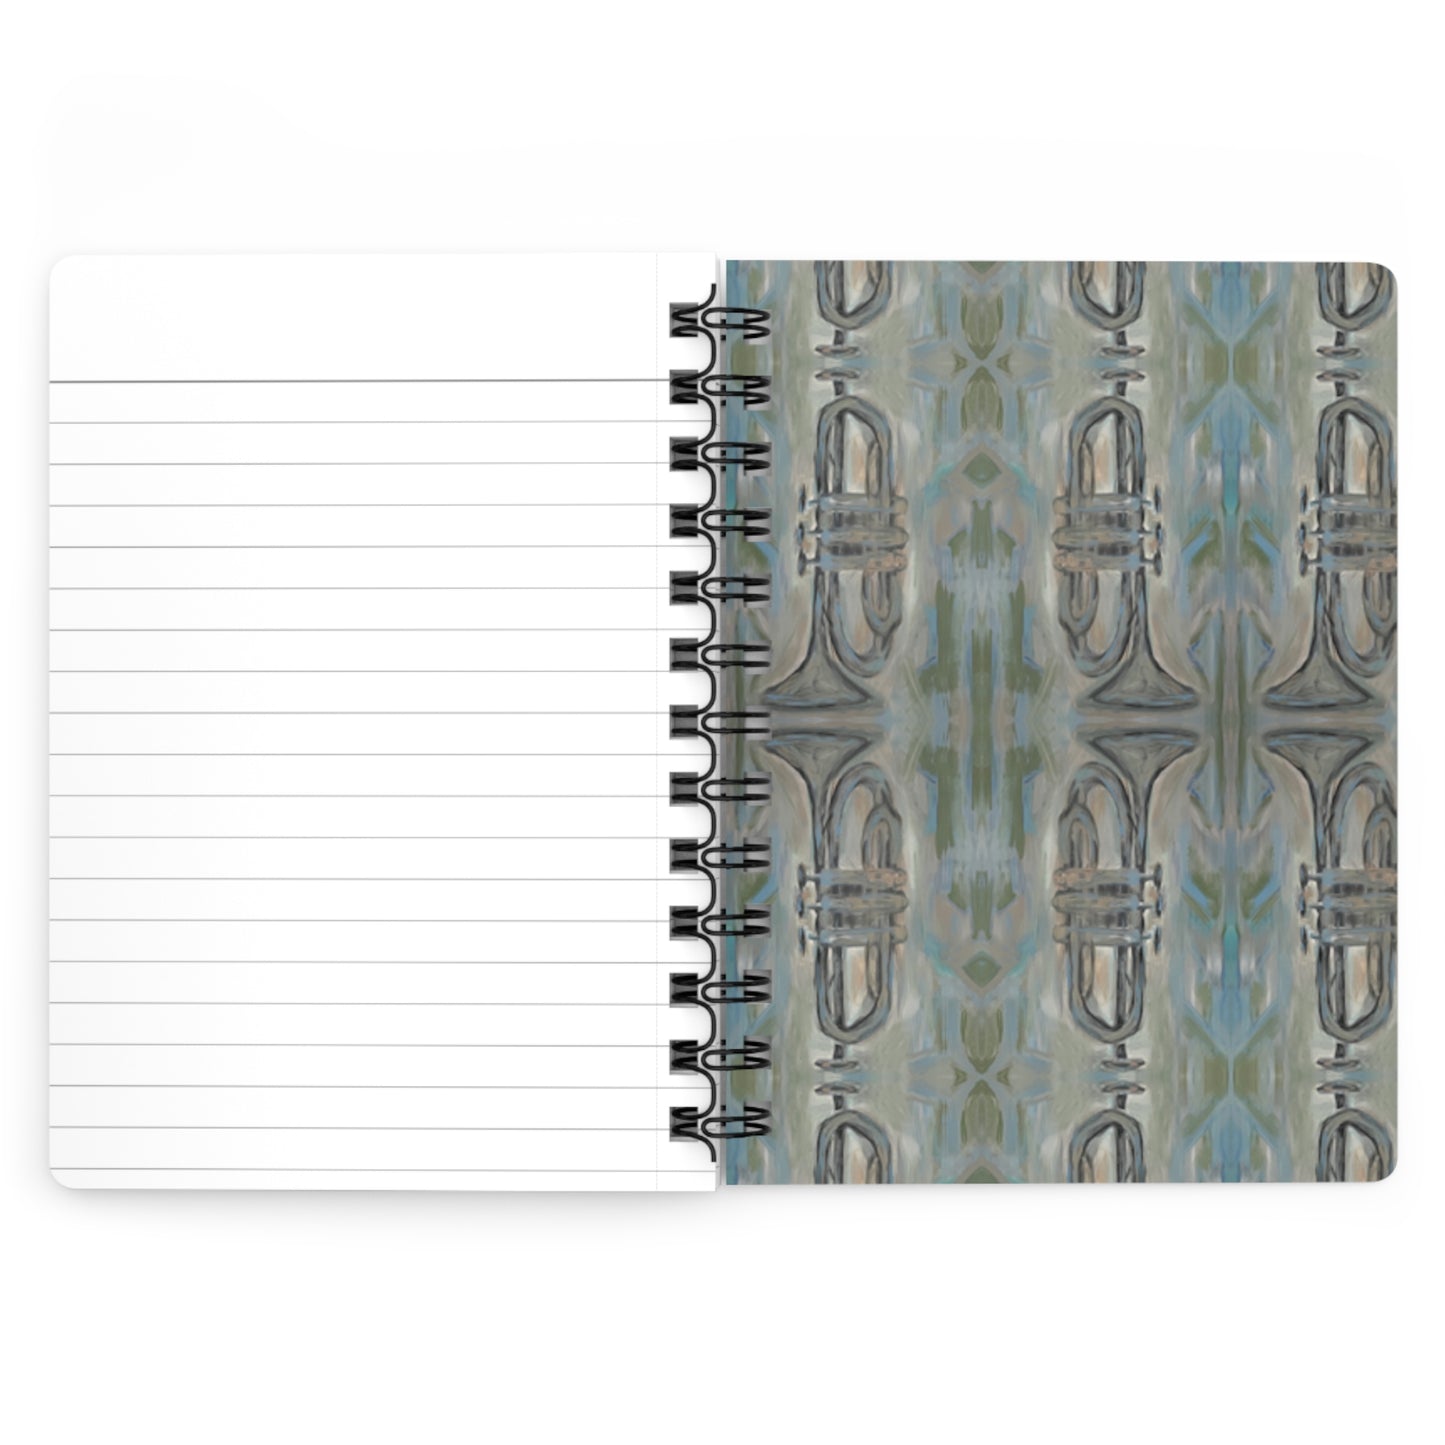 Notes from the Trumpet!  Write down your dreams in style in our spiral-bound journal featuring "Tin Roof Blues". Our notebooks feature a durable thick gloss laminated protective cover, with pattern repeat created from the original artwork on the inside front and back covers.  Made in the USA!  Journal comes in 5x7 size with 150 pages of lined paper with preforated eadge for easy tear removal!   .: Front, back and inside cover print .: 150 lined pages (75 sheets) .: Glossy laminated cover